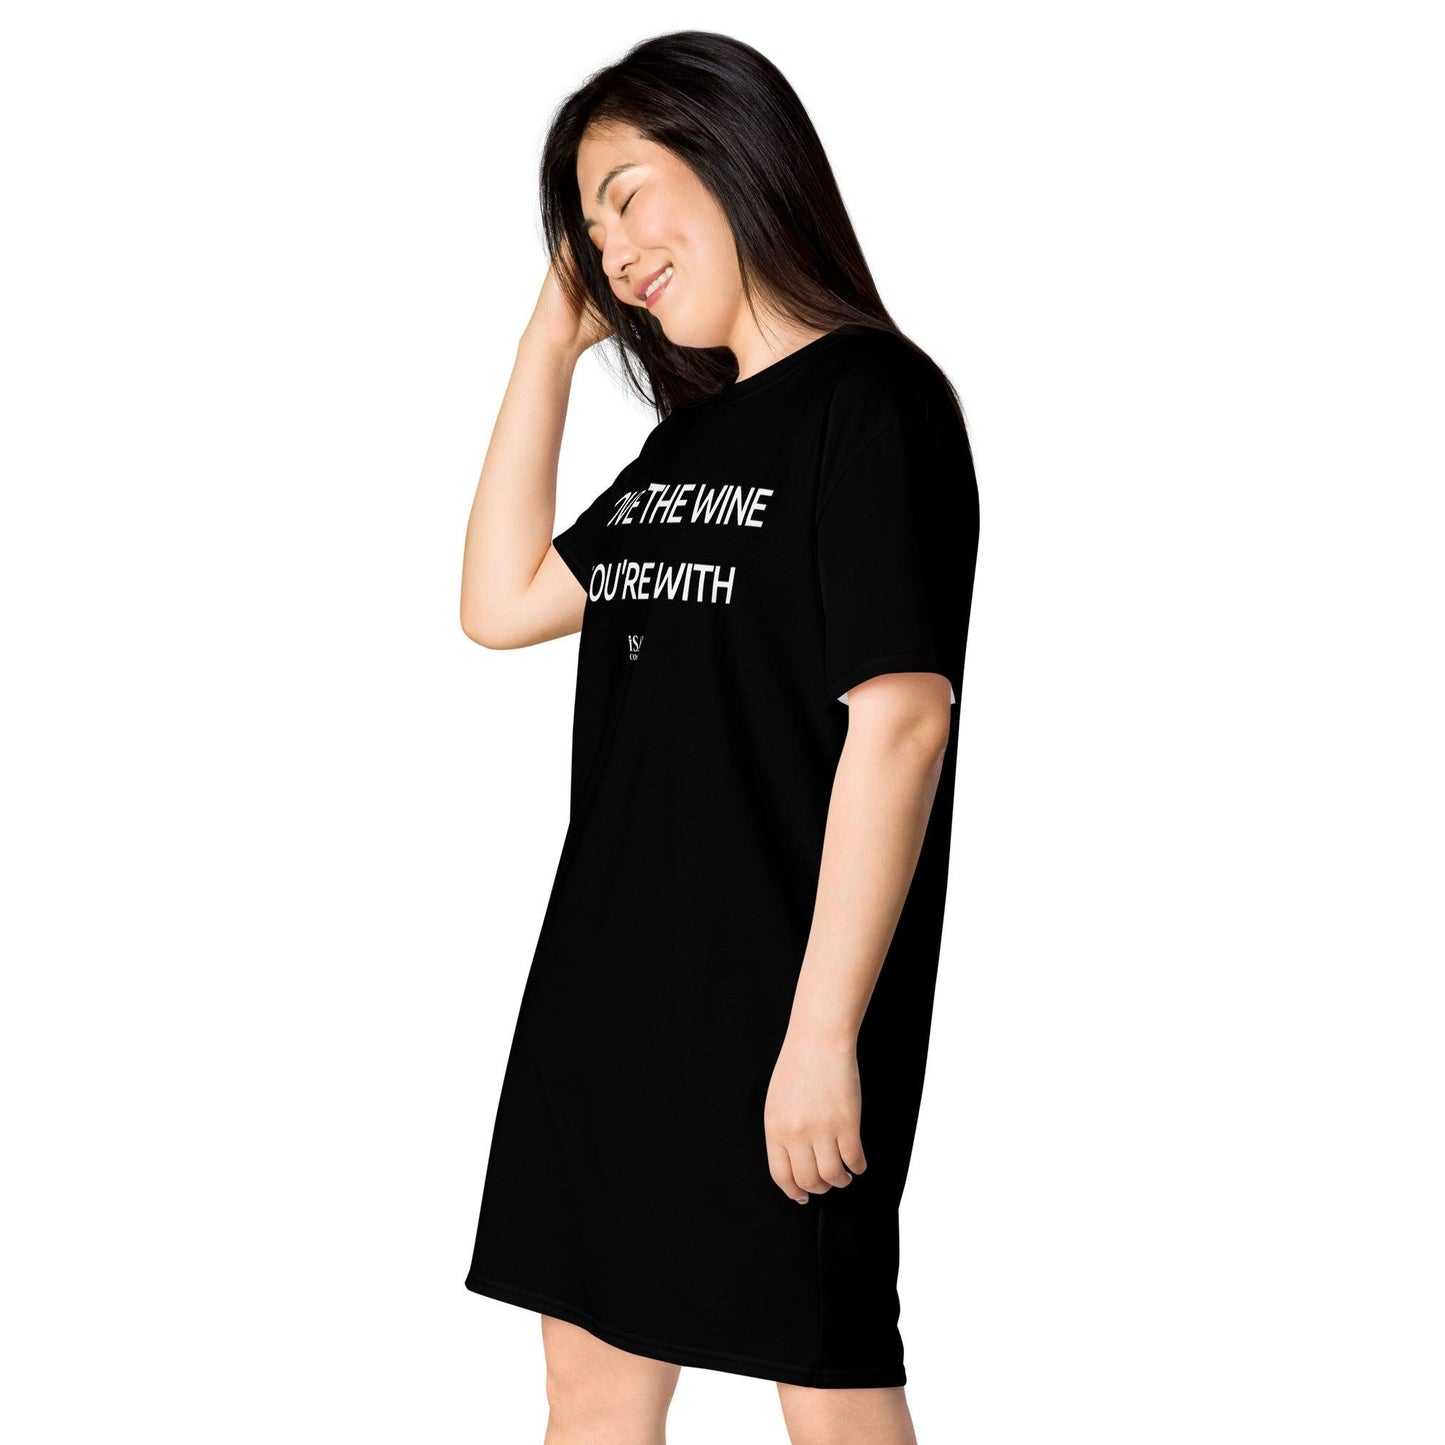 Love The Wine You’re With - Womens Black T-Shirt Dress - iSAW Company